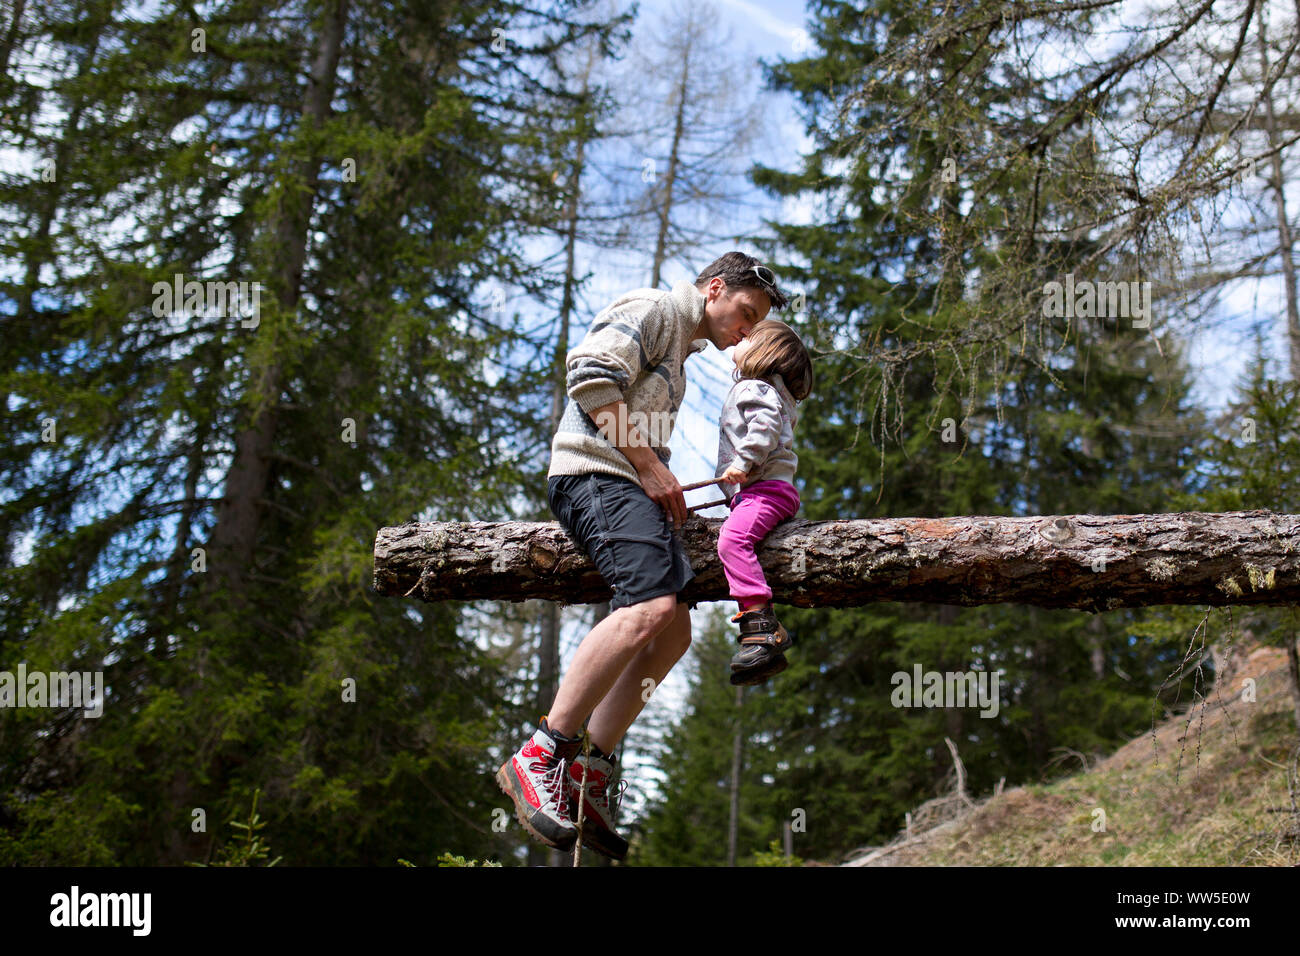 30-40 years old father sitting with 4-6 years old daughter on a trunk in the forest, affection, kiss Stock Photo